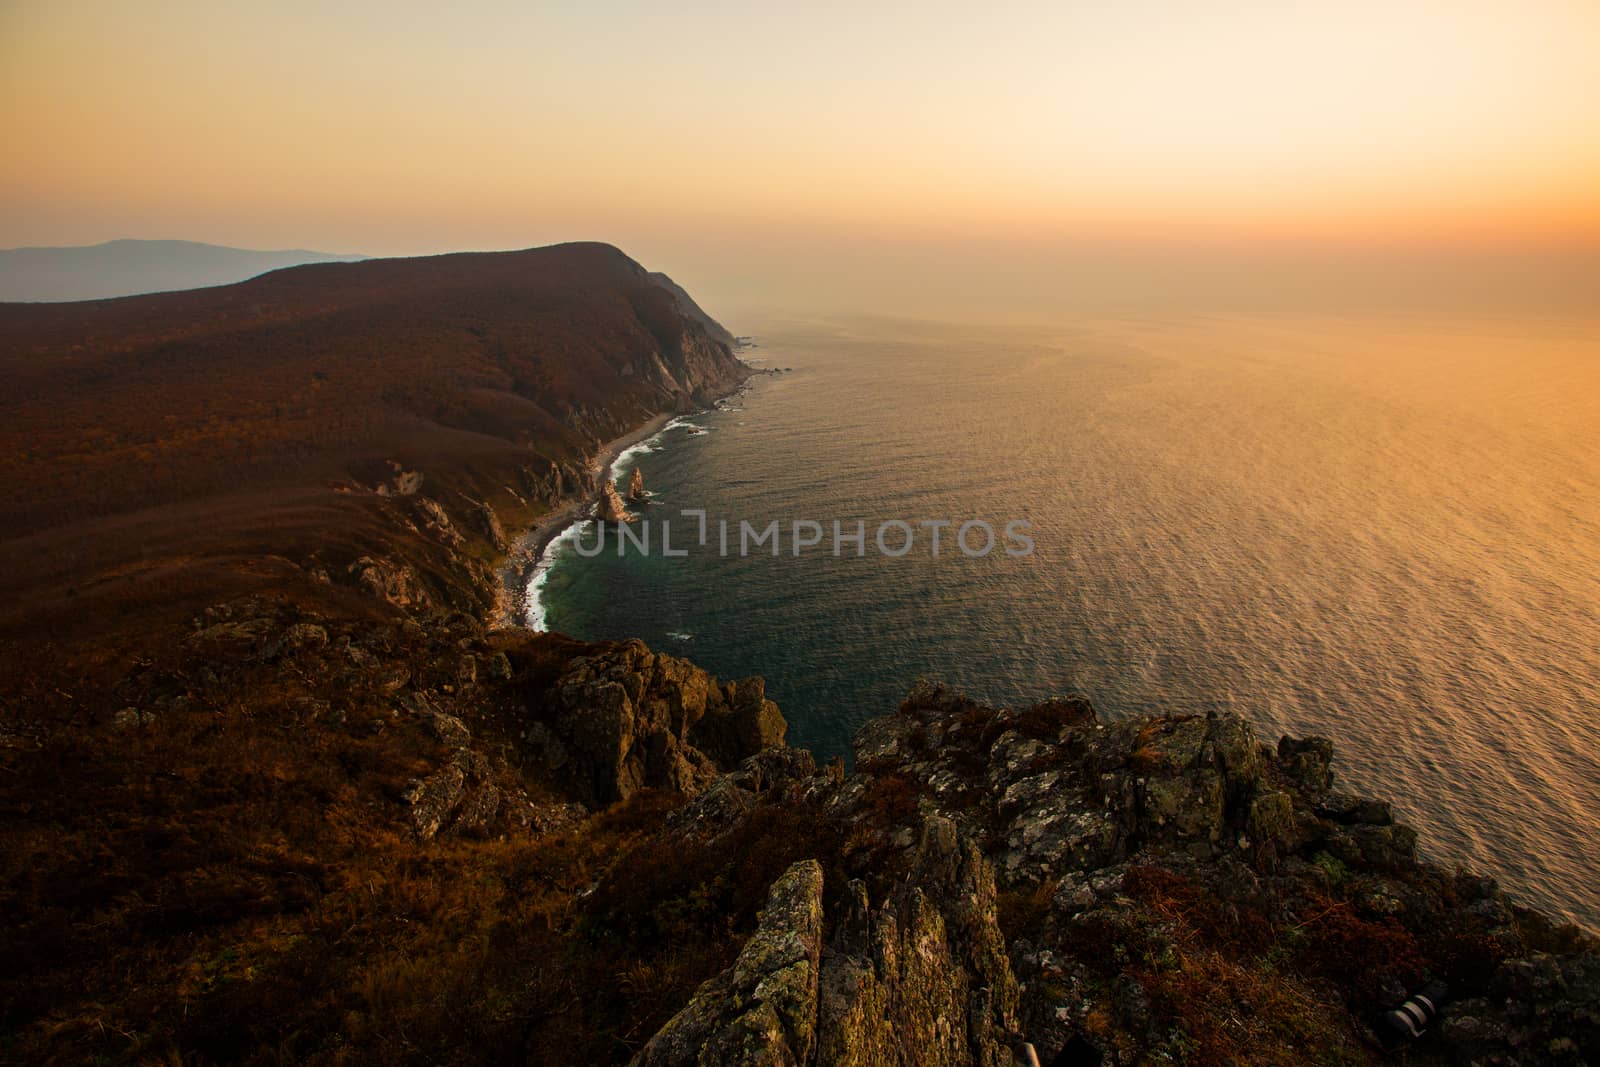 Panoramic view of the rocky coastline of the nature reserve during pink sunrise